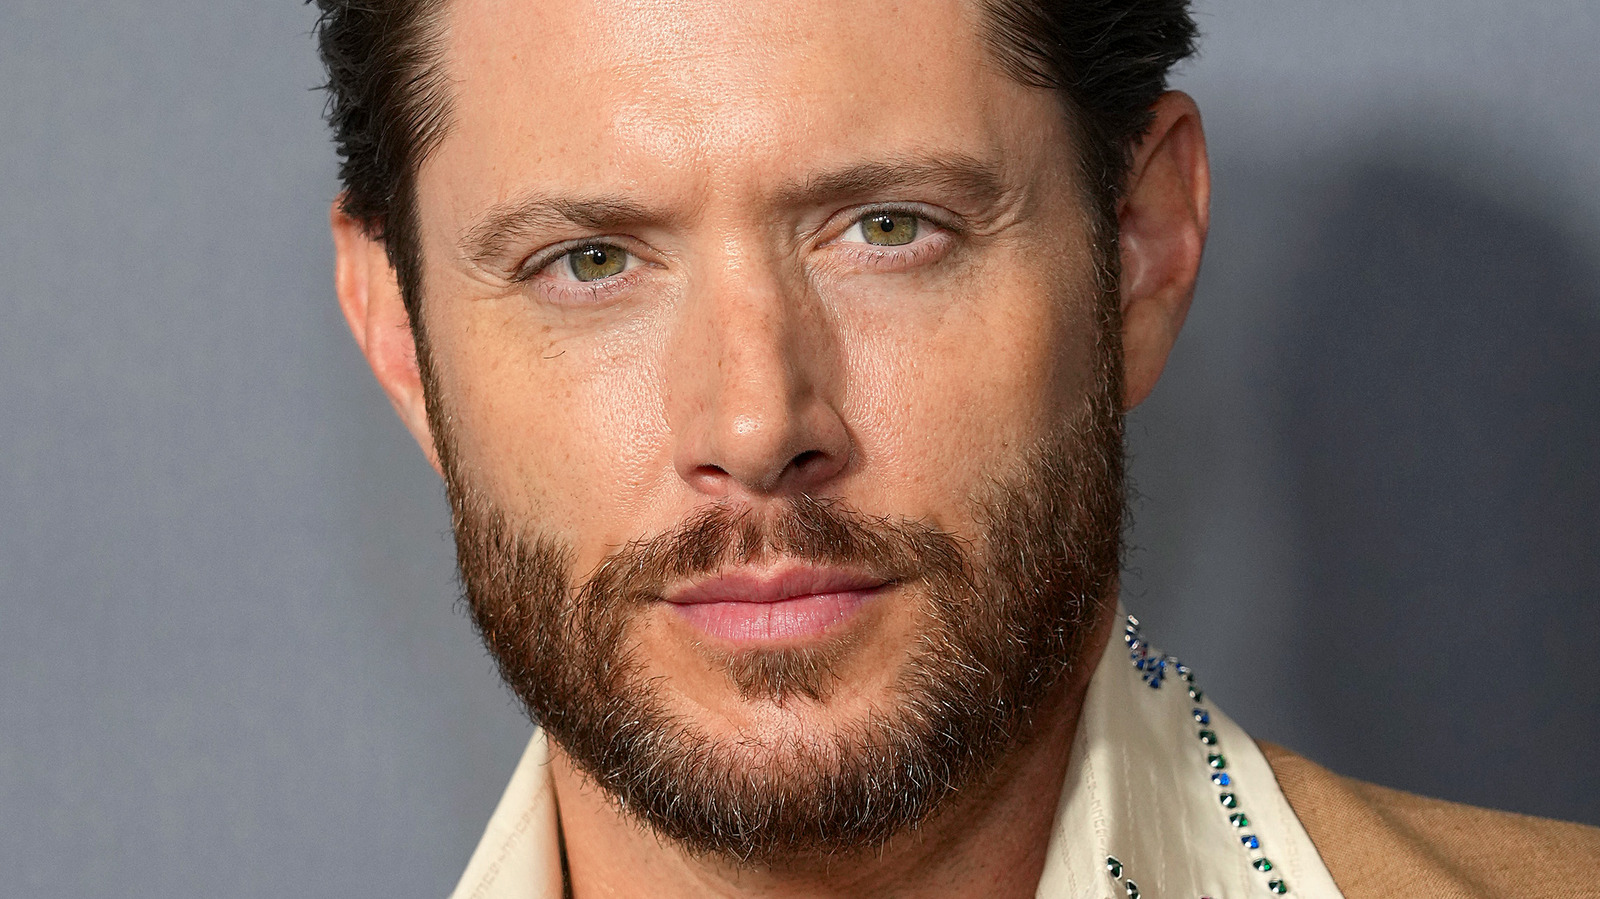 Jensen Ackles' Blue Hair Mohawk: The Impact of His Bold Choice on Fans - wide 3